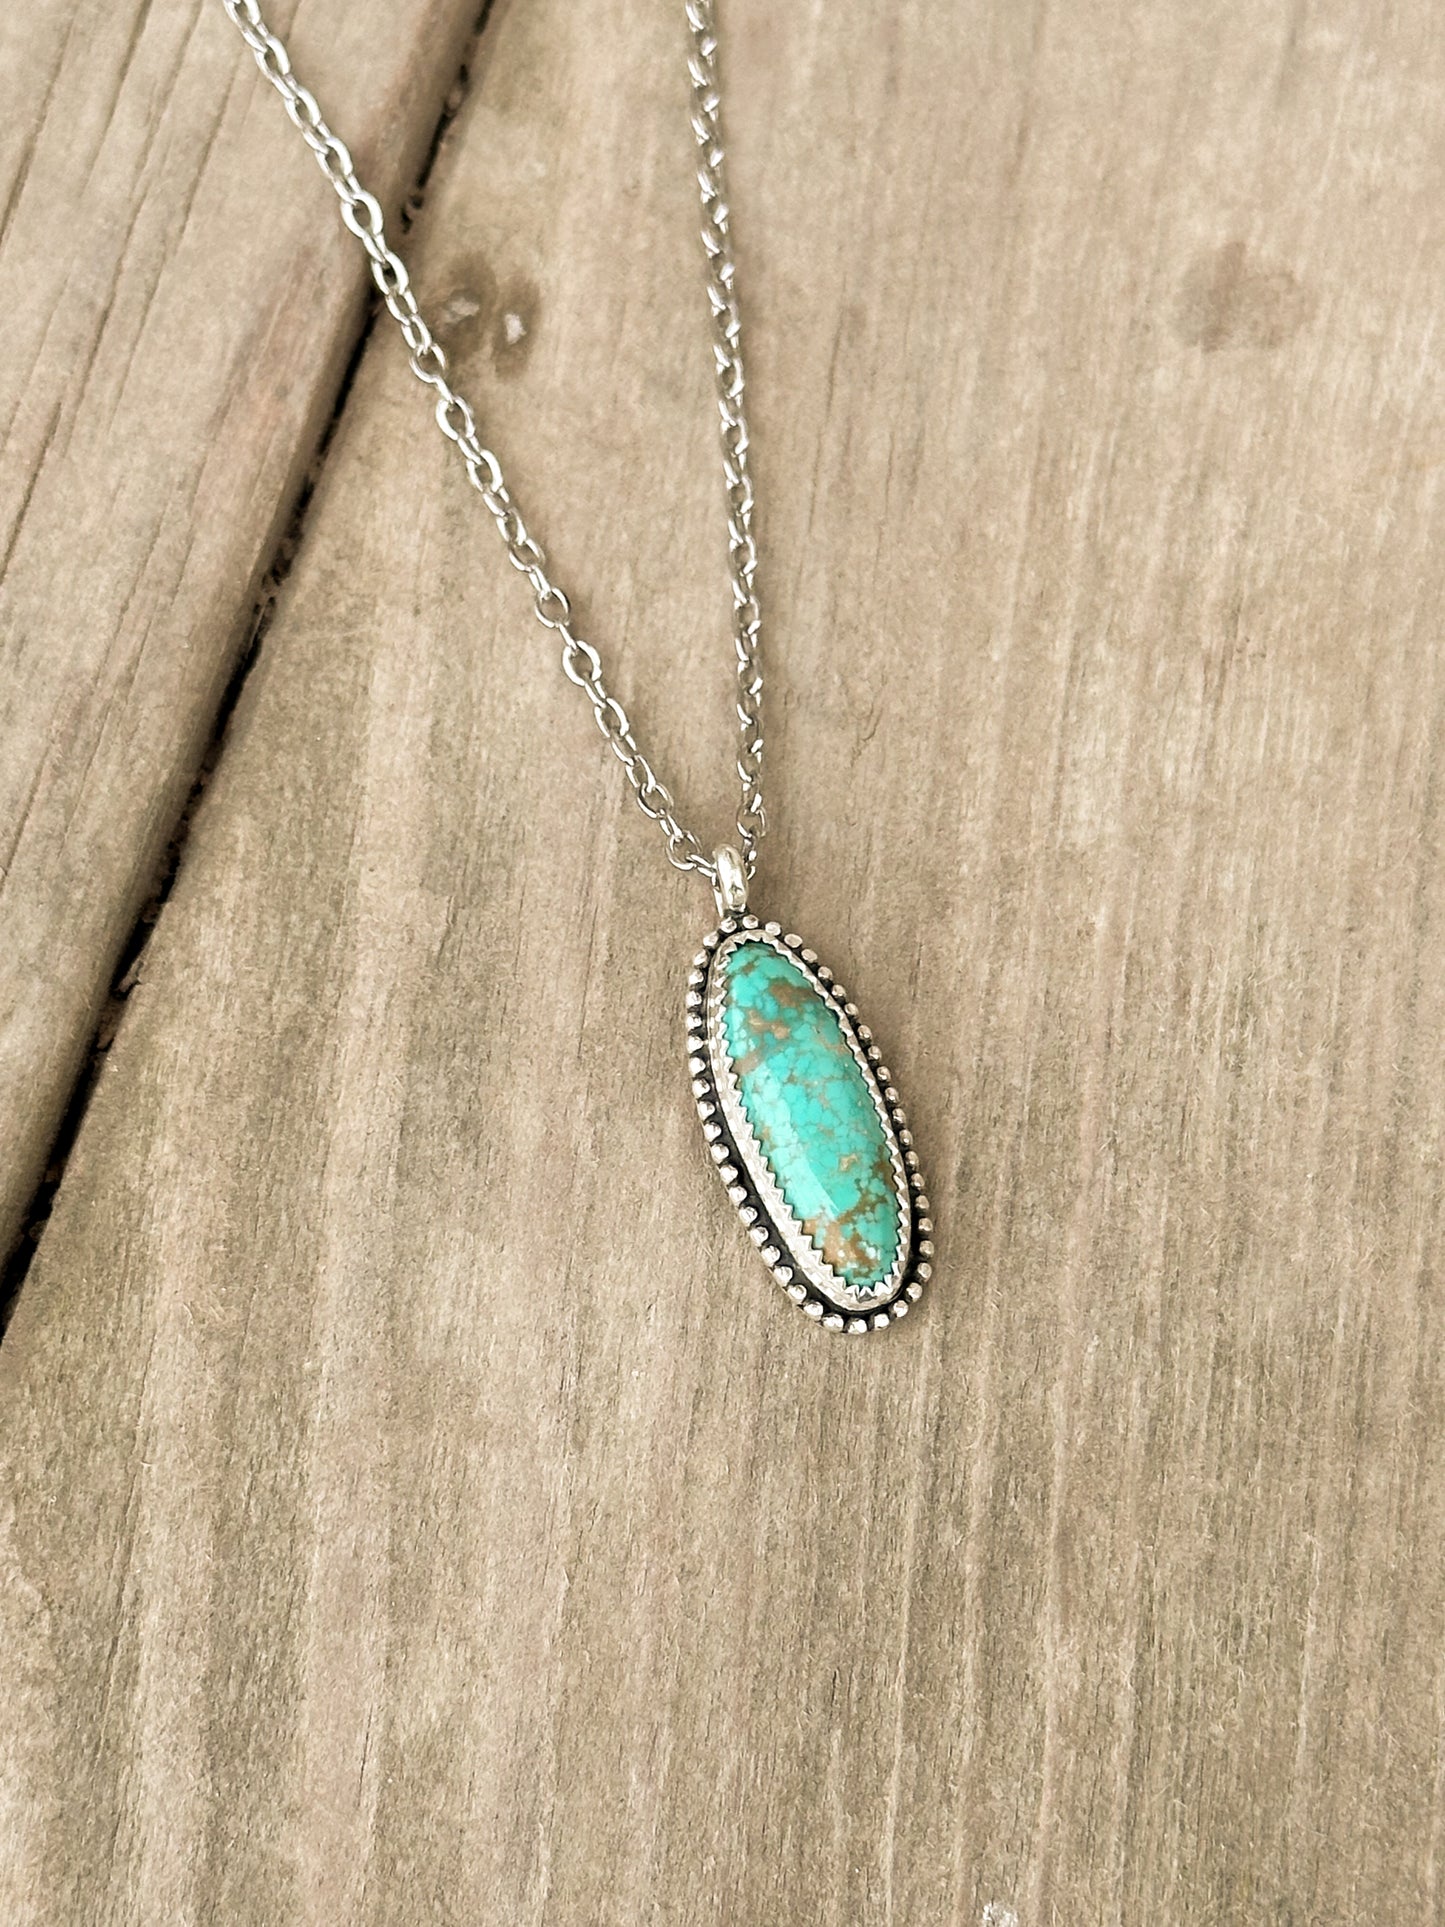 Carico Lake Turquoise & Sterling Silver Pendant Necklace